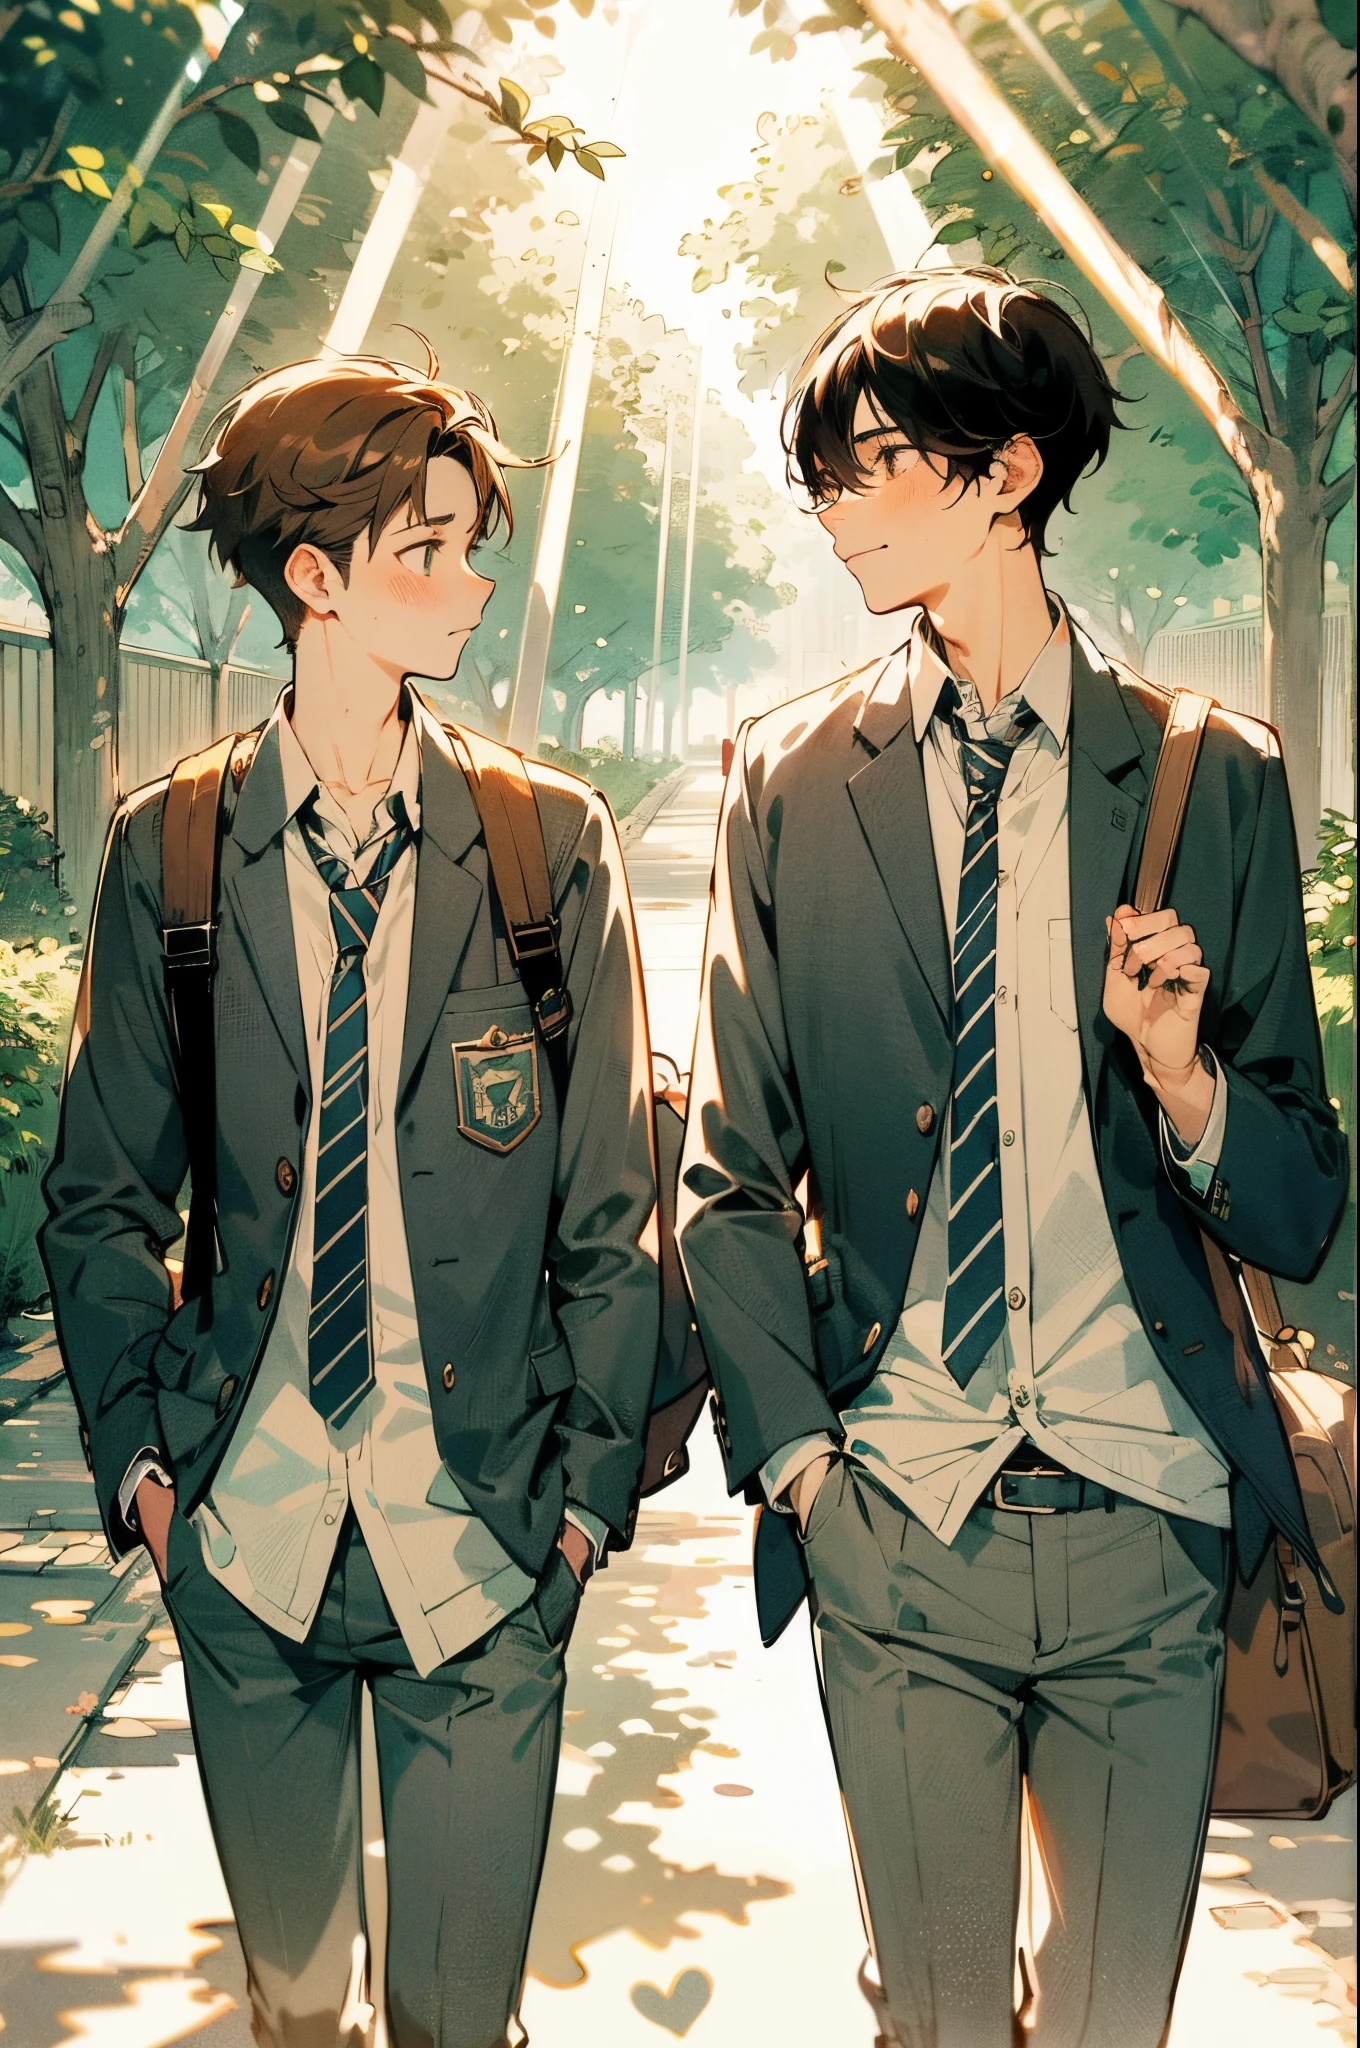 This is a Pixiv-style vertical illustration.。, painted two handsome young men, one person has brown hair、The other has black hair., Wear school uniforms and walk side by side. While walking along a tree-lined avenue bathed in the morning sunlight、Two people having a lively conversation. Artwork reflects Japanese anime style、Has clear line drawings, Transparent watercolor, and clear shading, moments of friendship、A photo that captures the serene beauty of the morning walk to school